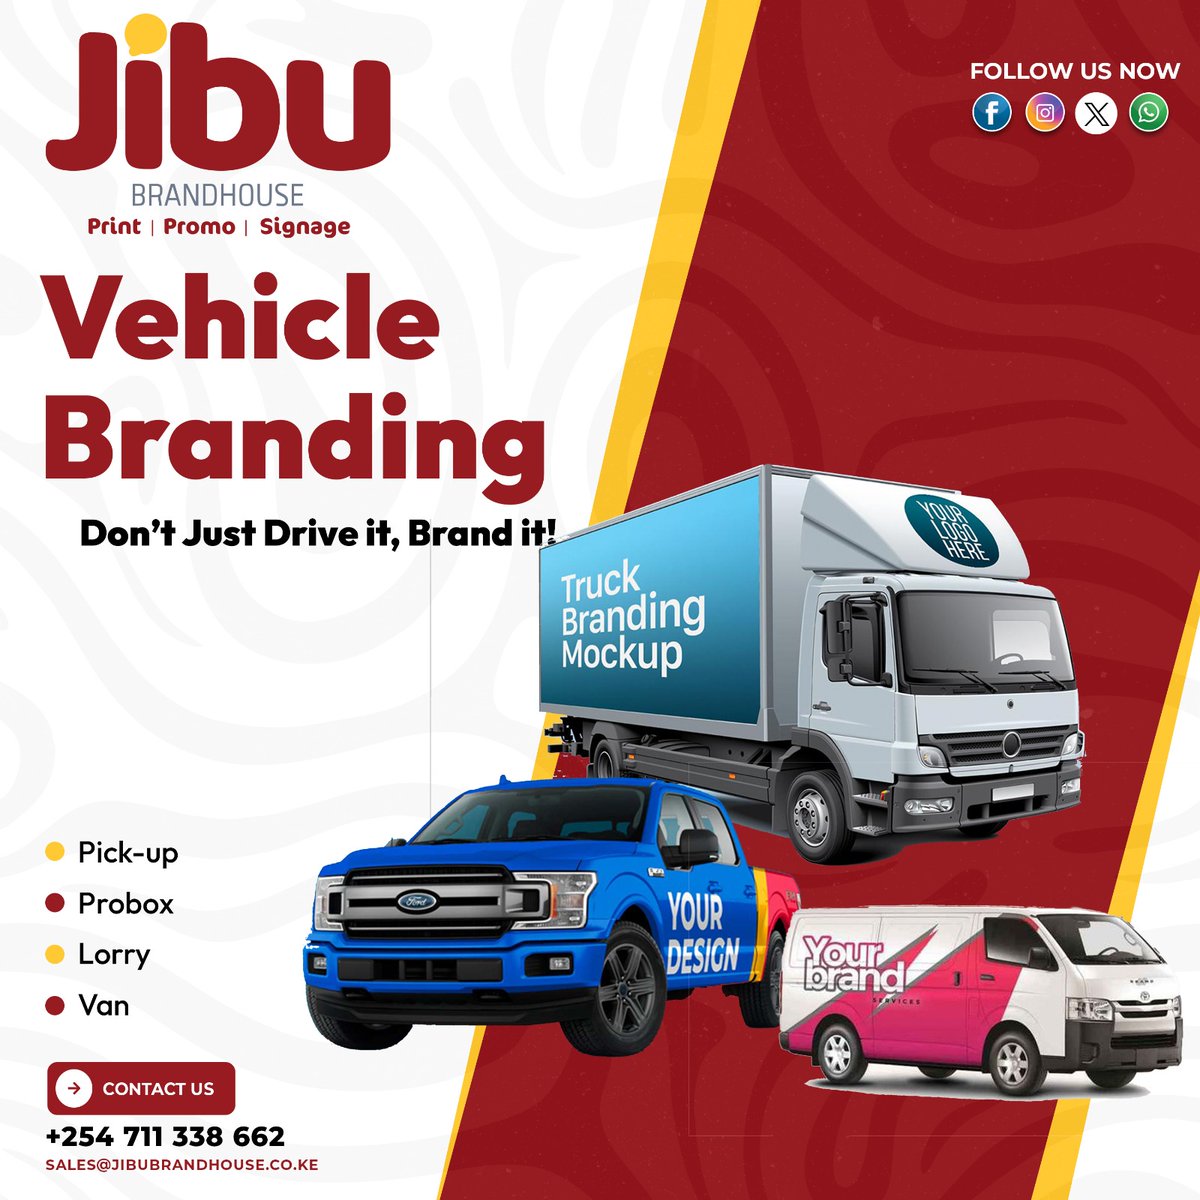 It's time for a fresh look!

We have high-quality vynils to protect the artworks from the natural elements.

Talk to us today for FREE mockup call/whatsapp 0711338662 or email sales@jibubrandhouse.co.ke 

#Vehiclebranding 
#WeAreTheAnswer